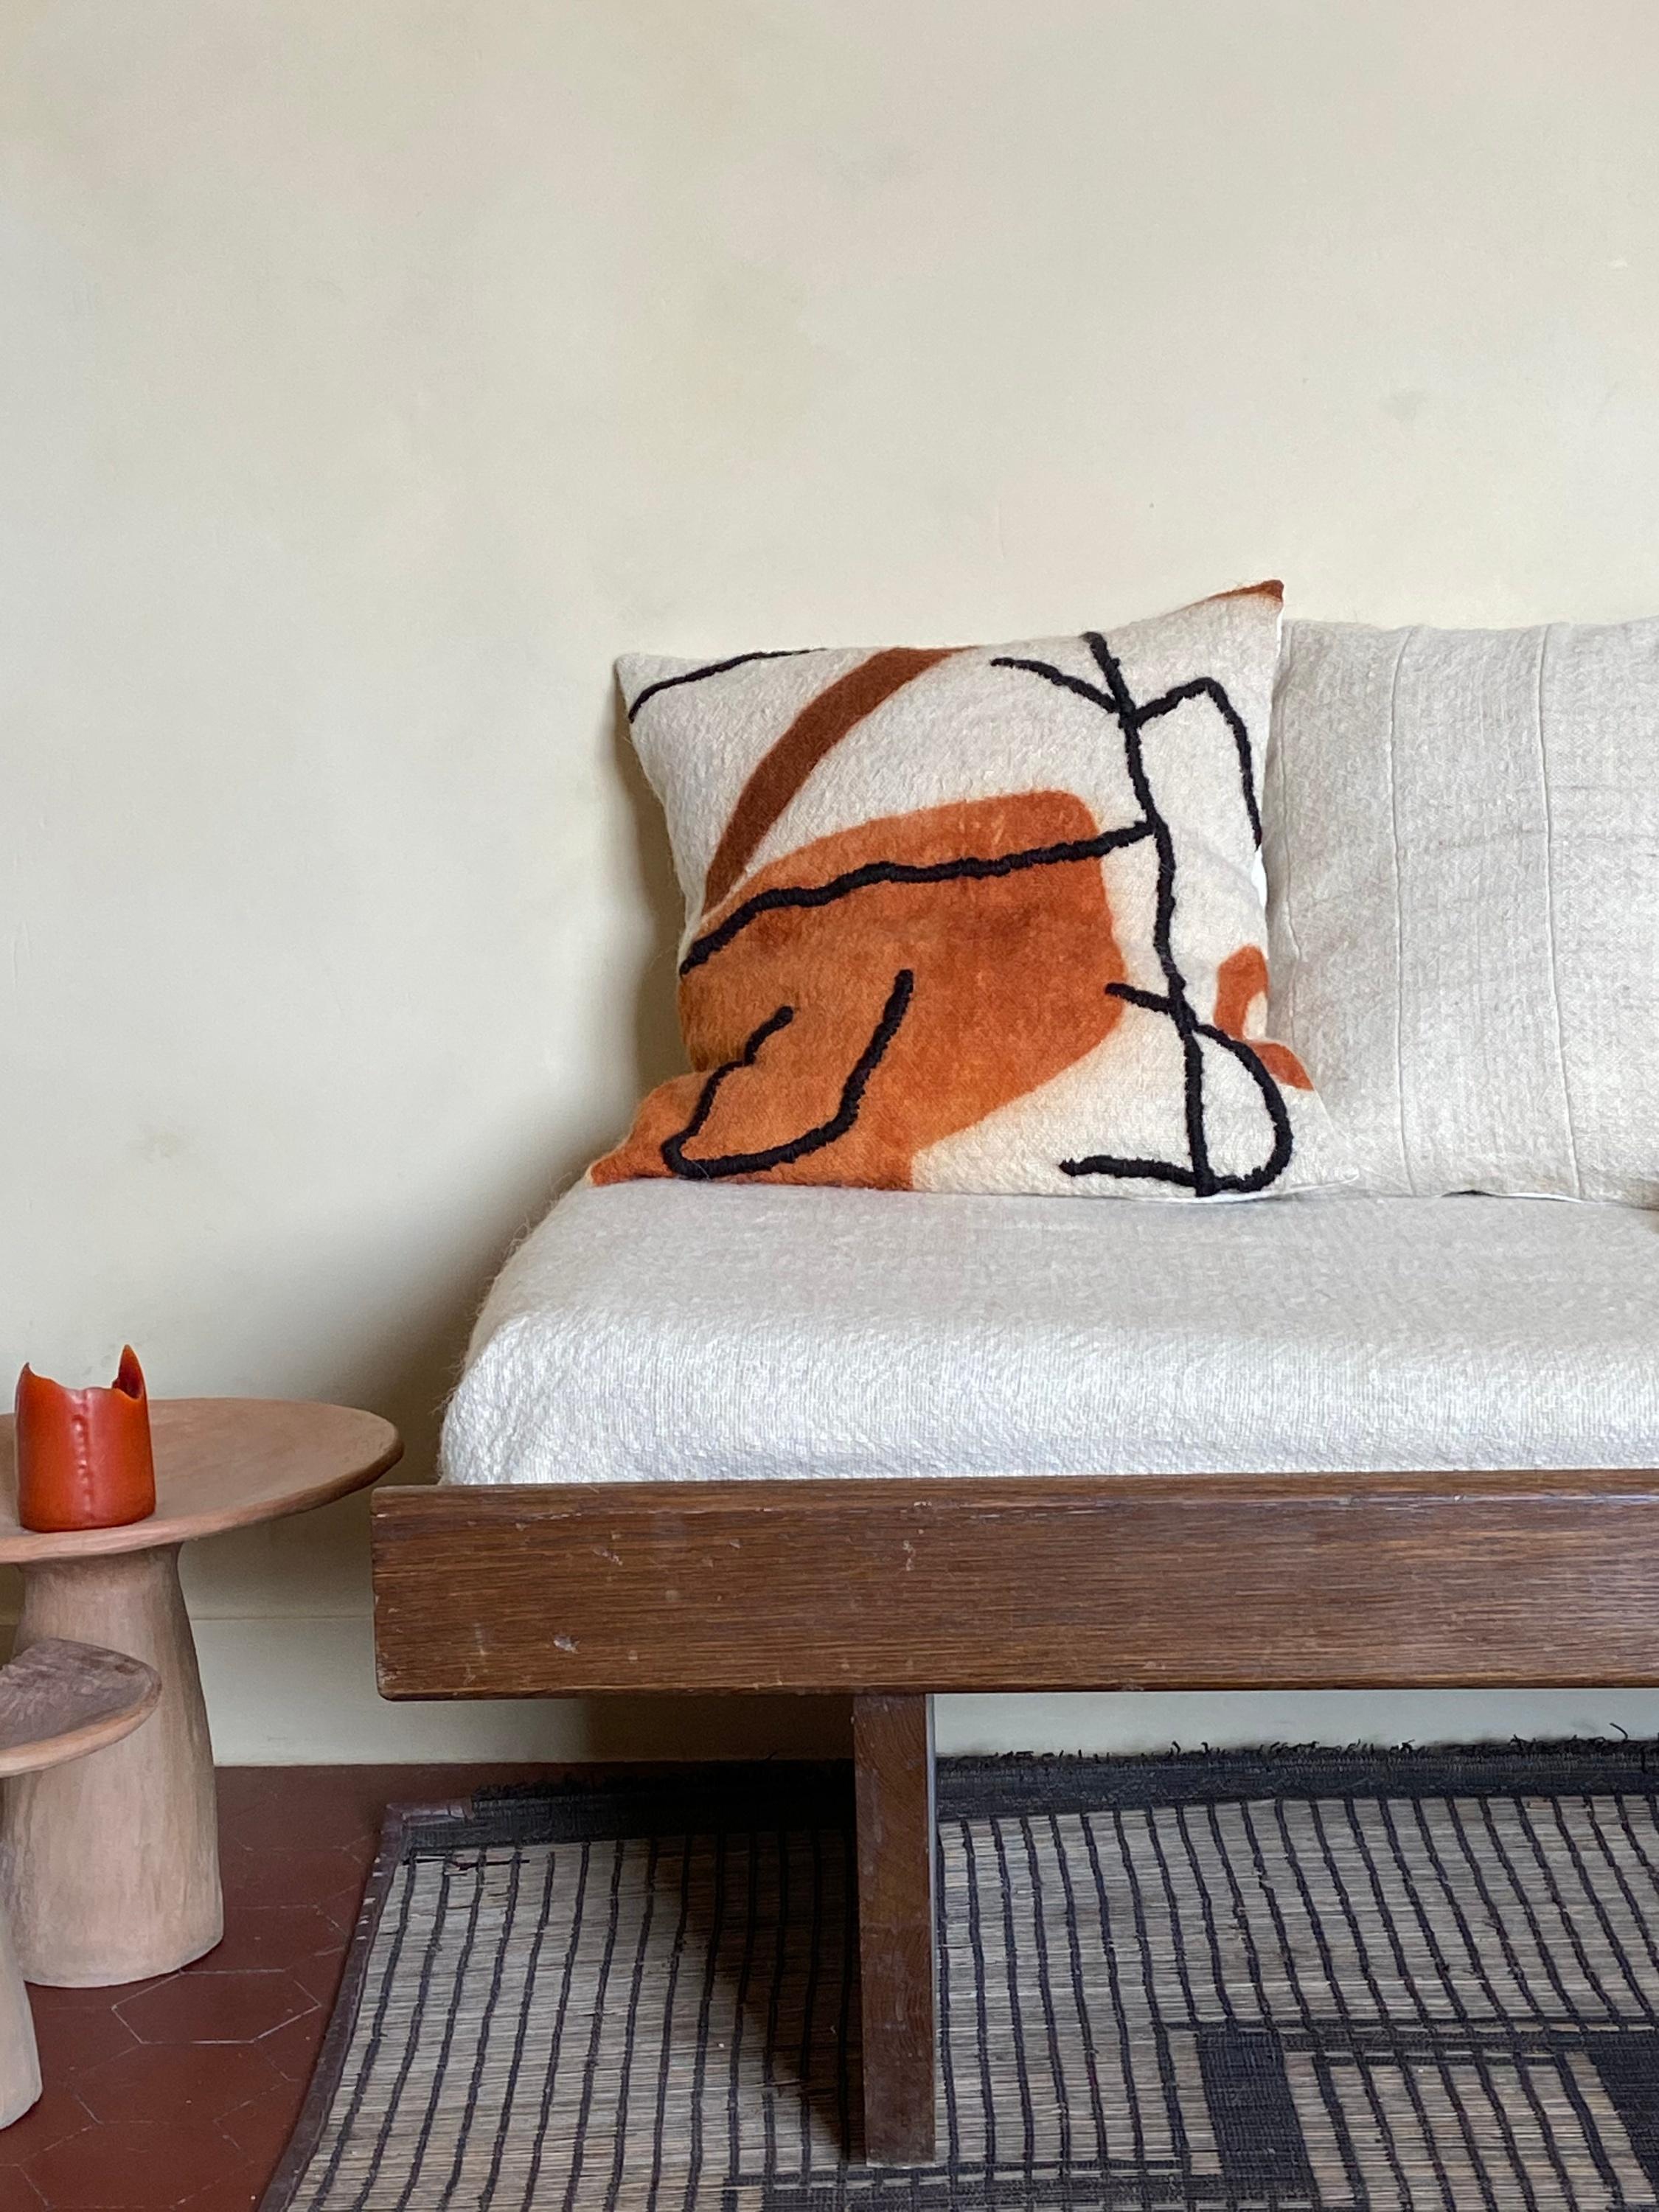 Handspun and handwoven white, orange and brown pillow 
- Front: 100% Siroua wool, an endangered sheep living in a volcanic massif with very long wool fibers, located less than 100 km from the weavers' village
- Back: 100% cotton woven in